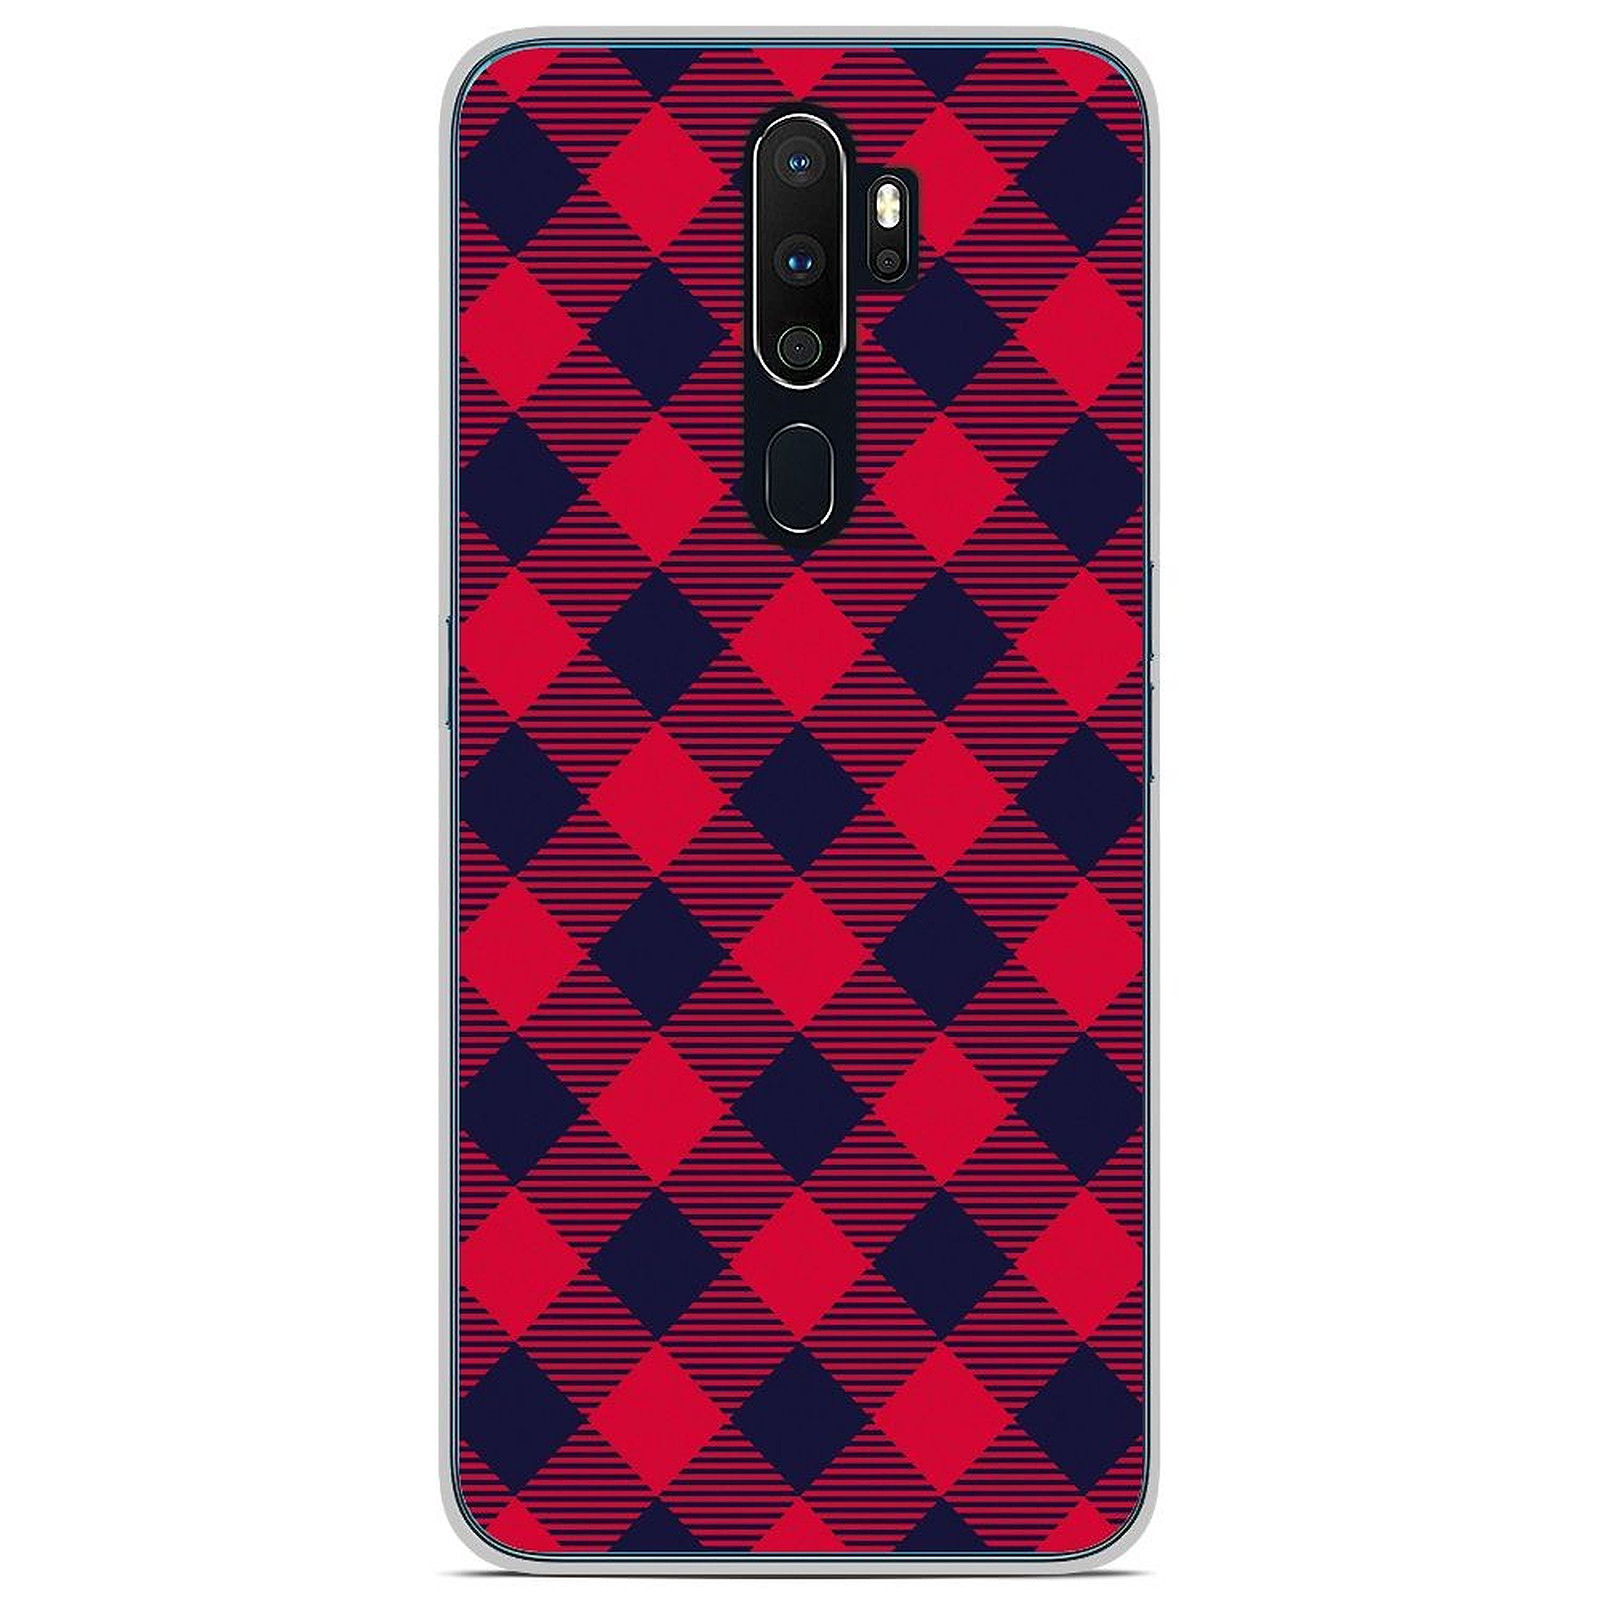 1001 Coques Coque silicone gel Oppo A9 2020 motif Tartan Rouge - Coque telephone 1001Coques